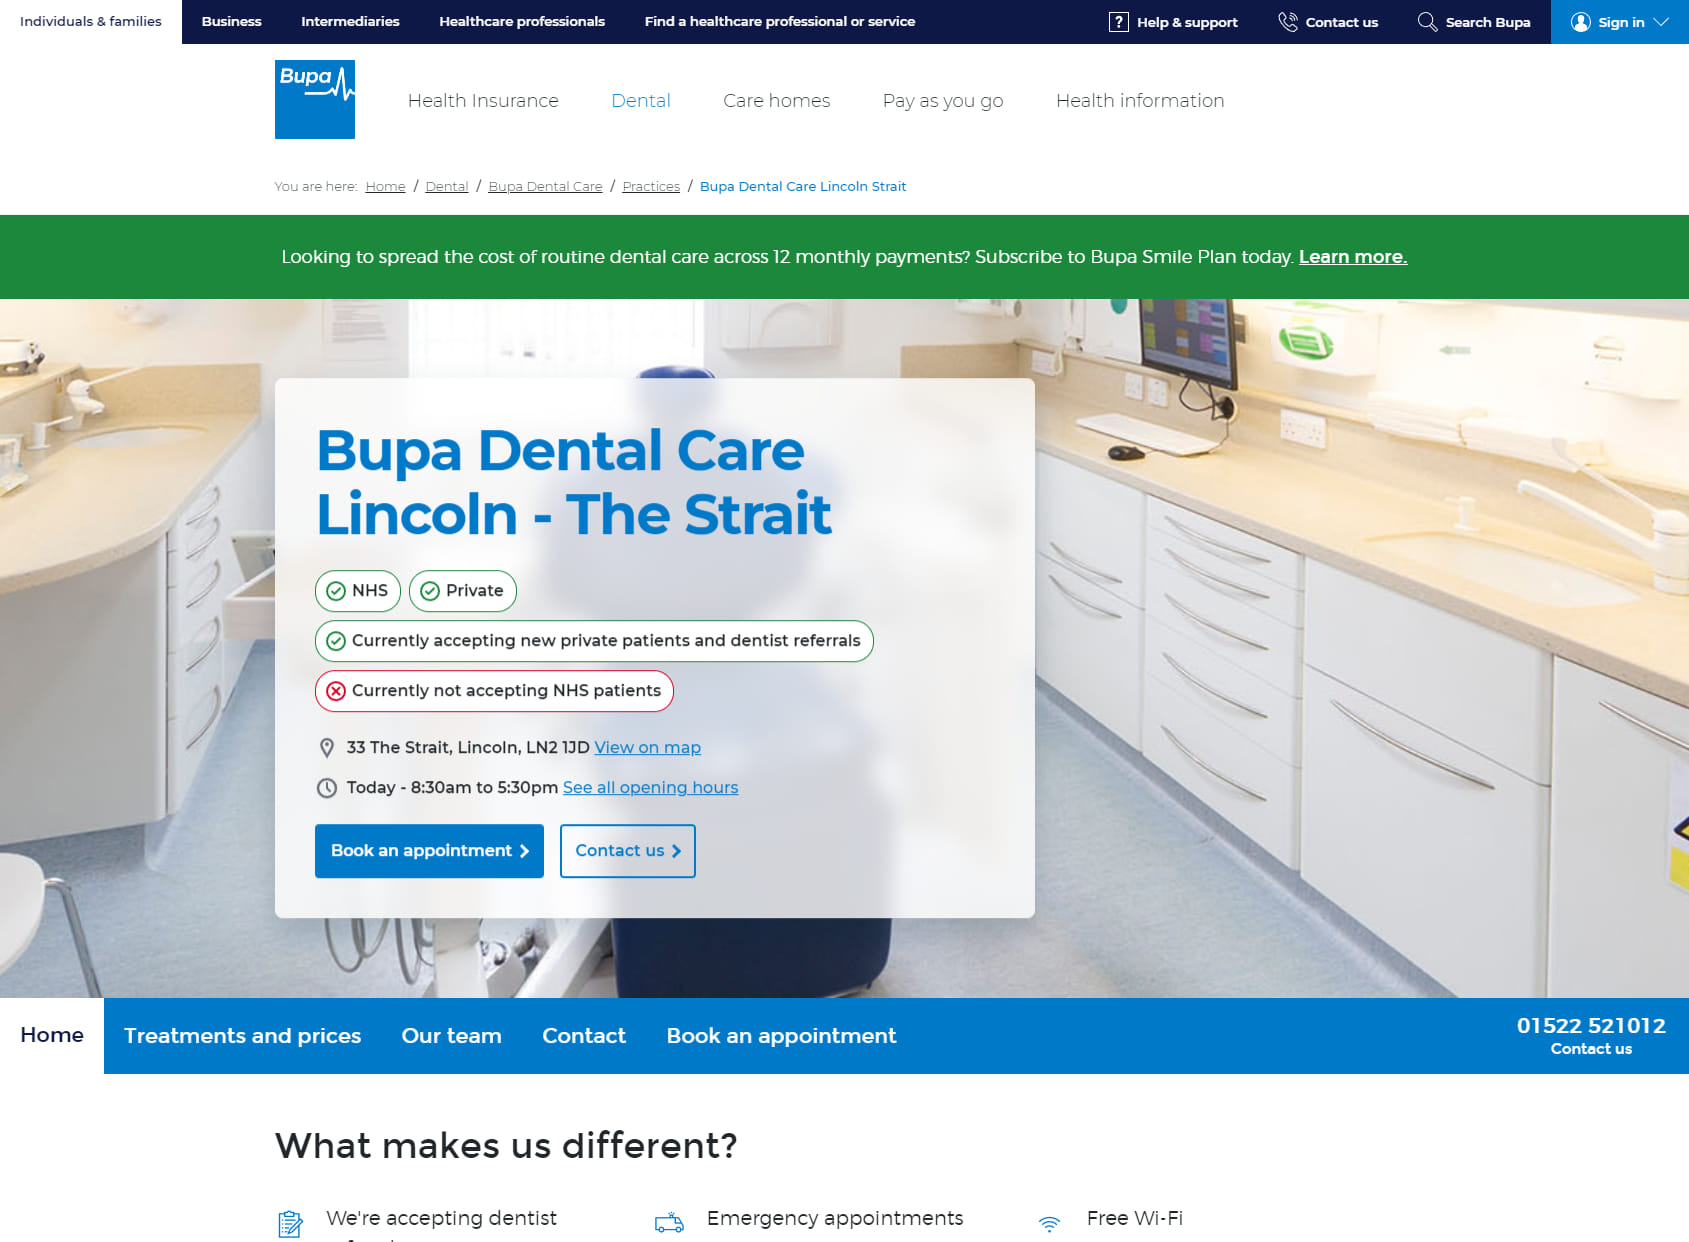 Bupa Dental Care Lincoln - The Strait